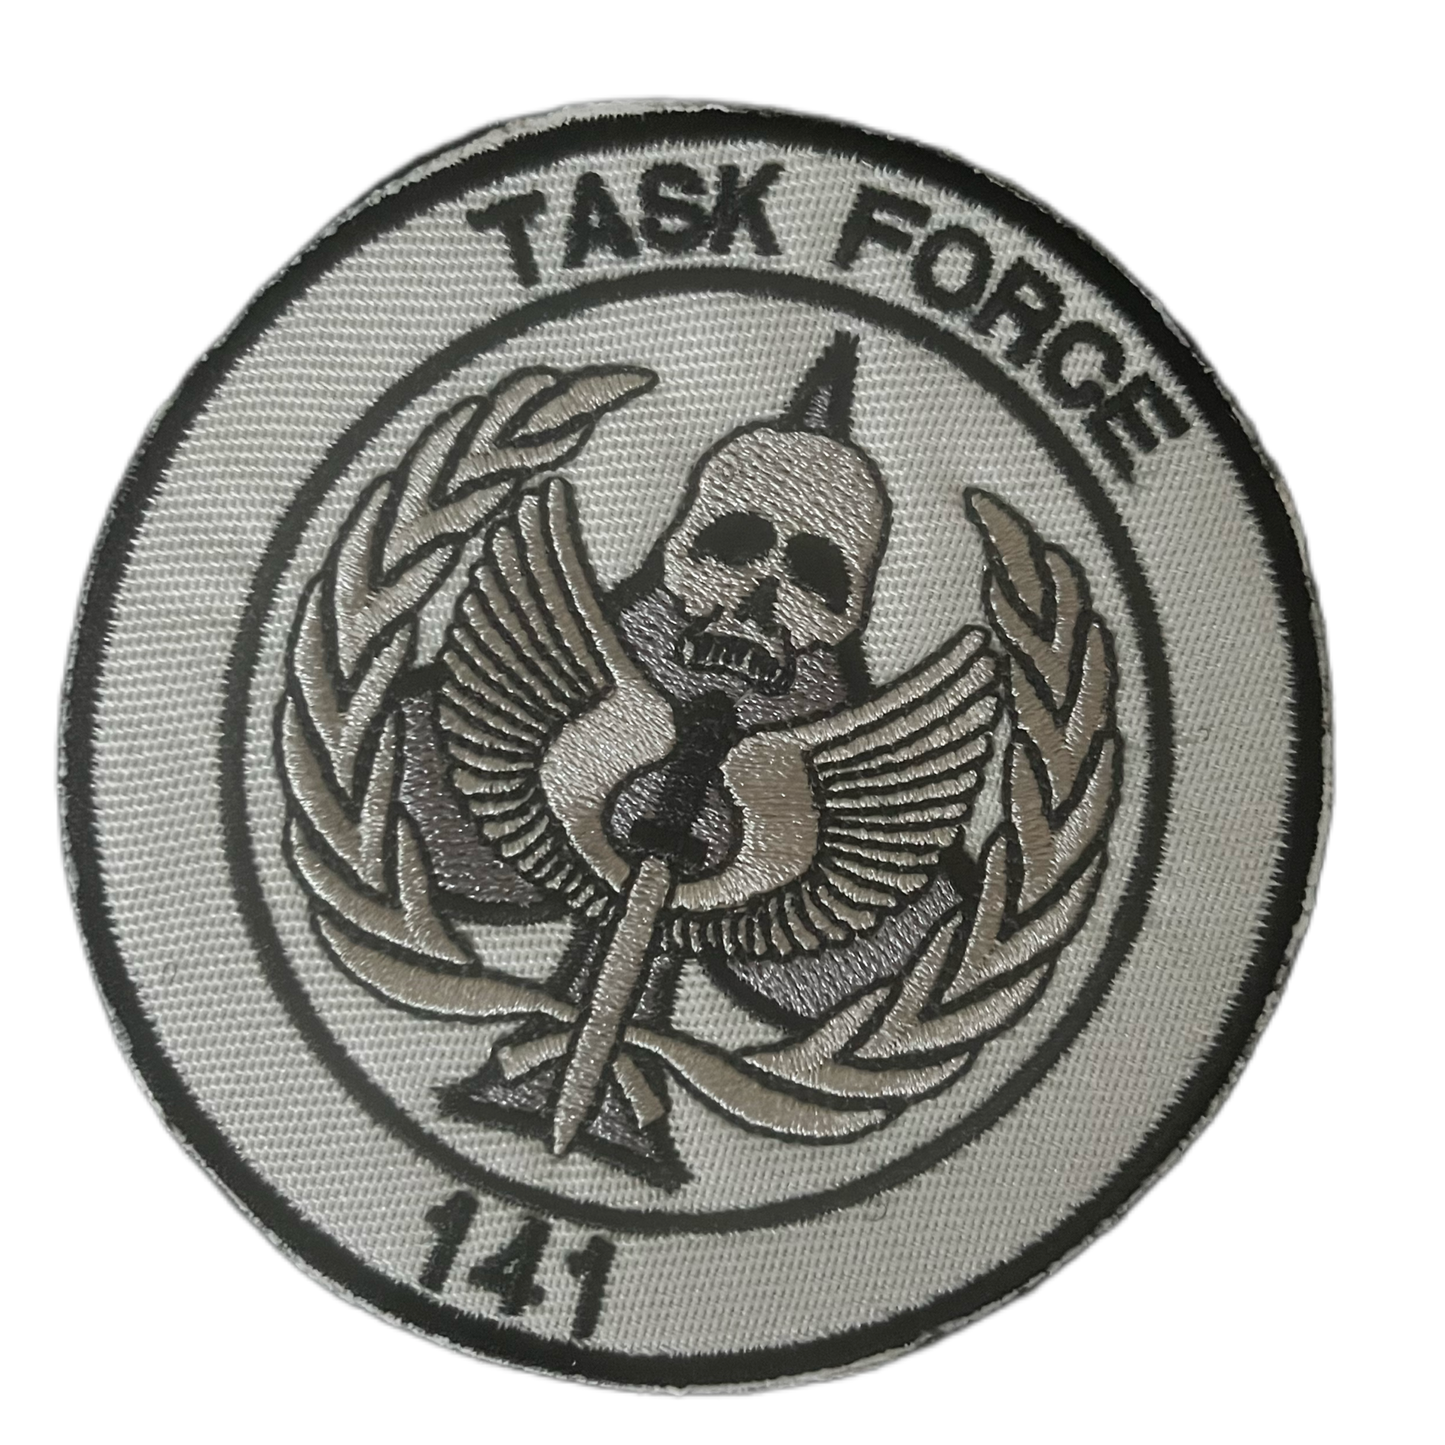 Task Force 141 Sewn Tactical Morale Patch